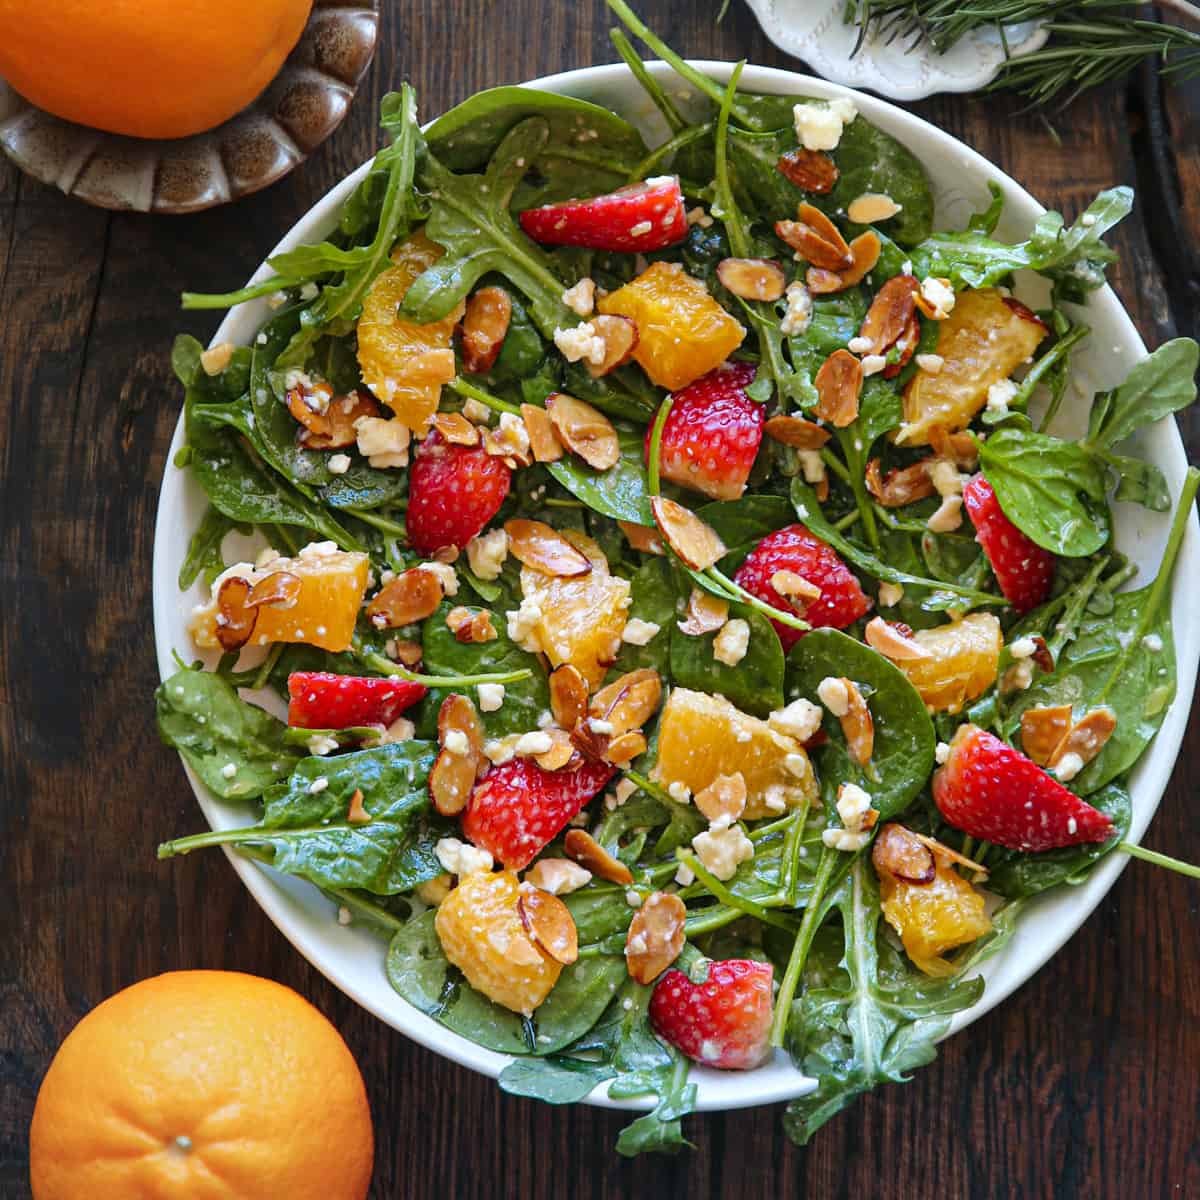 Strawberry Orange Salad with Spinach, Arugula, Toasted Sliced Almonds, and Feta Cheese - in a white bowl.